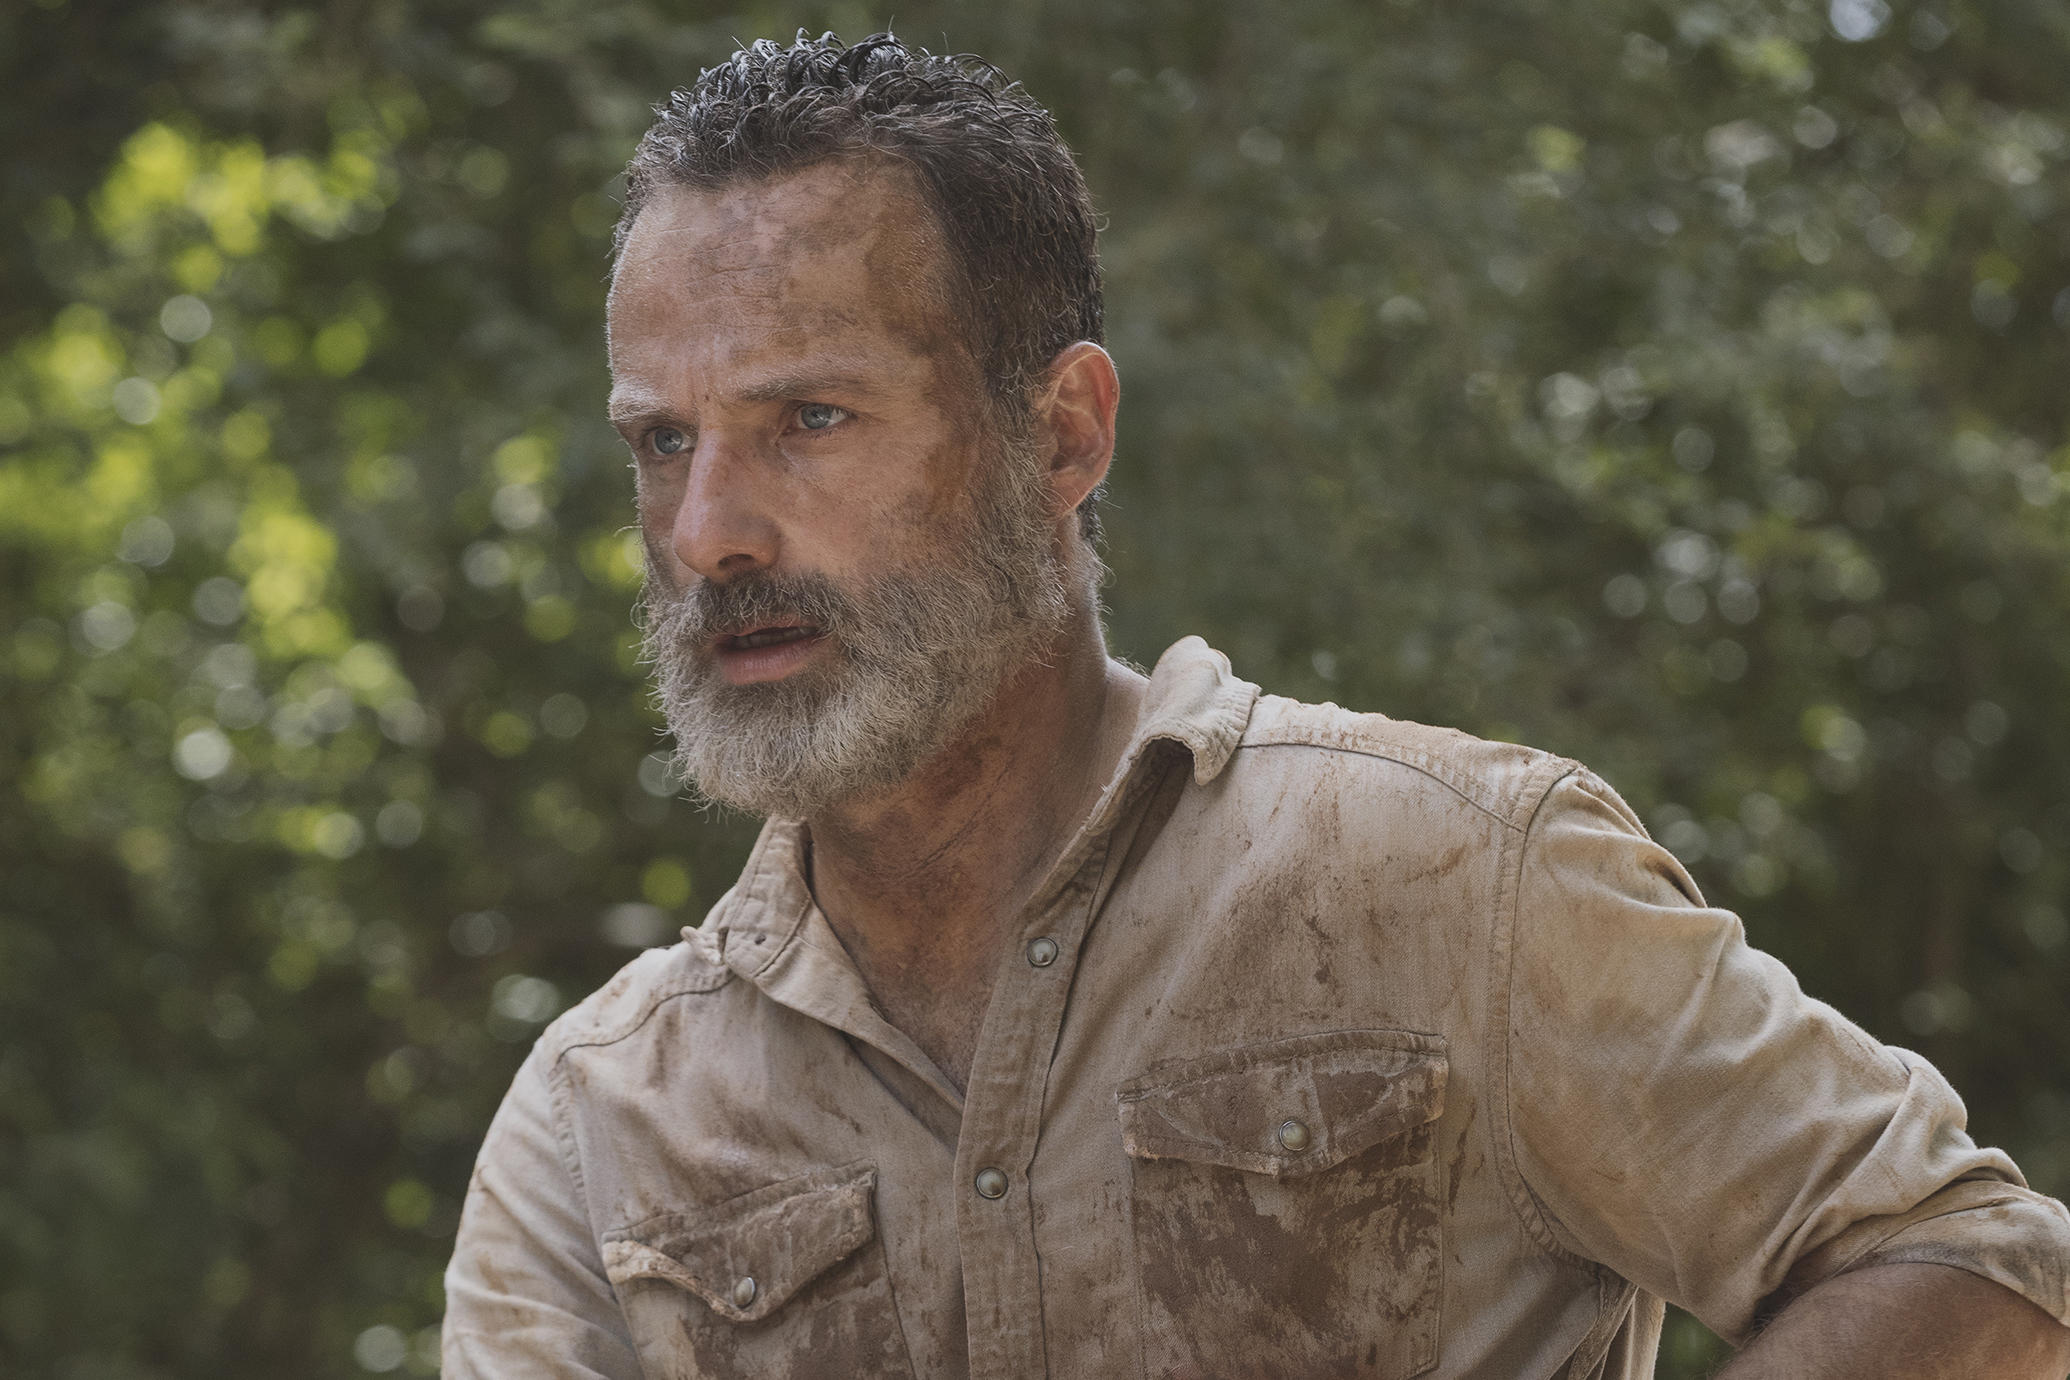 💀 How Well Do You Know “The Walking Dead”? Andrew Lincoln as Rick Grimes on The Walking Dead